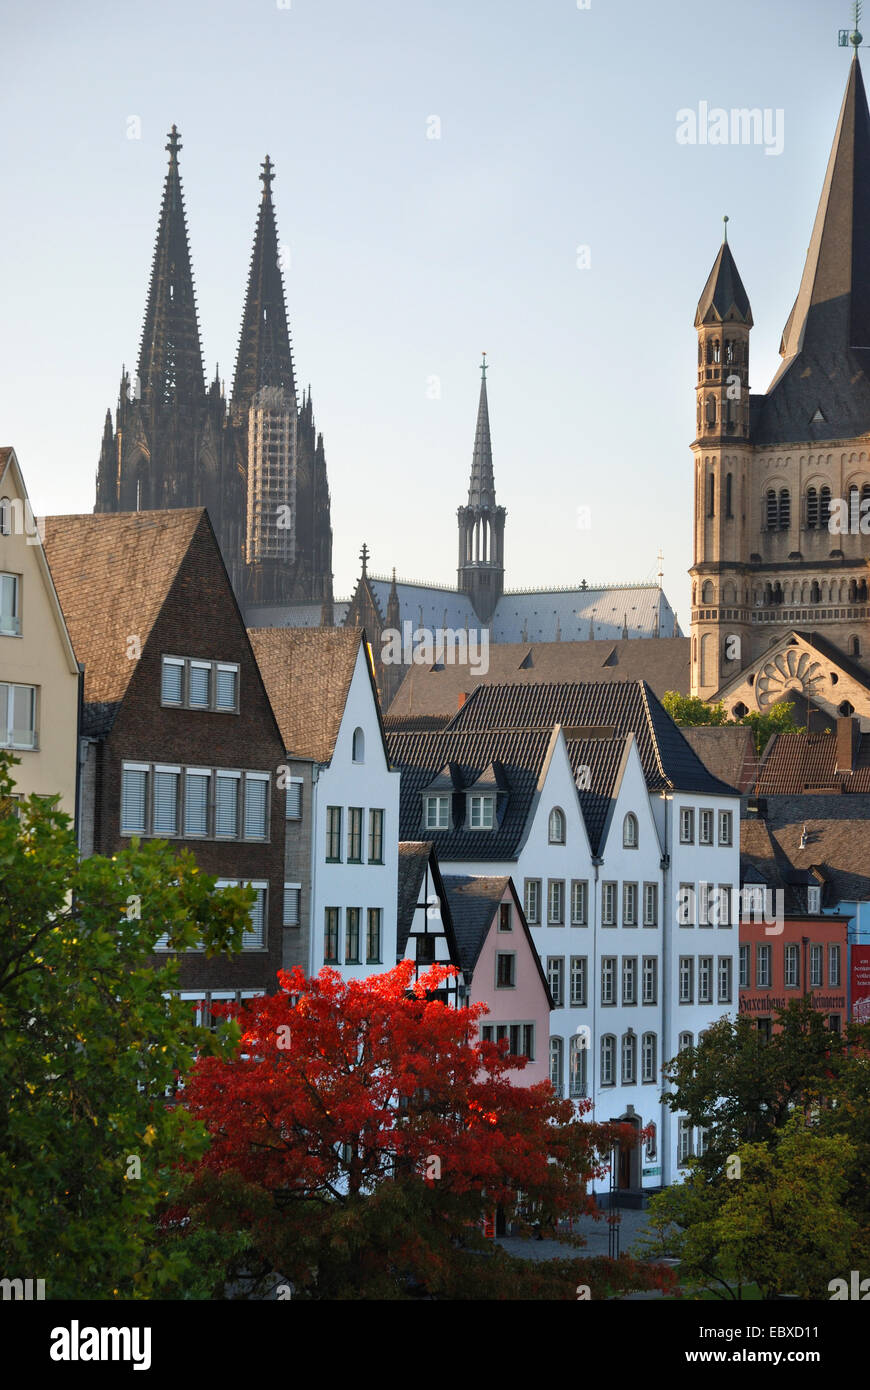 buildings in old town, Cologne Cathedral in background, Great St. Martin Church to the right, Germany, North Rhine-Westphalia, Koeln Stock Photo